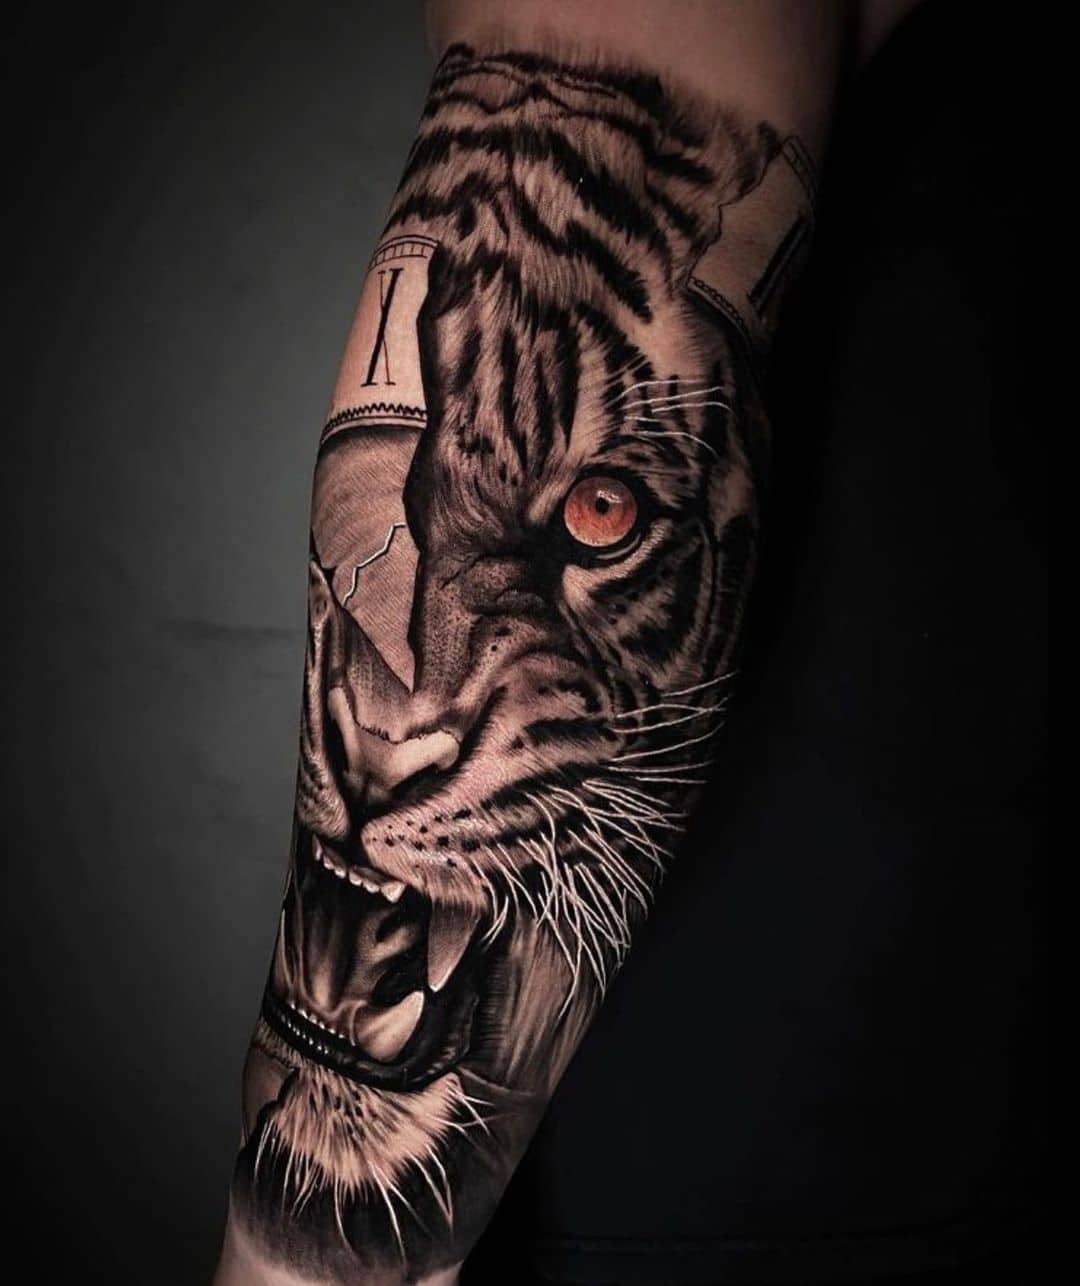 Wonderful roaring tiger by matheussnttattoo